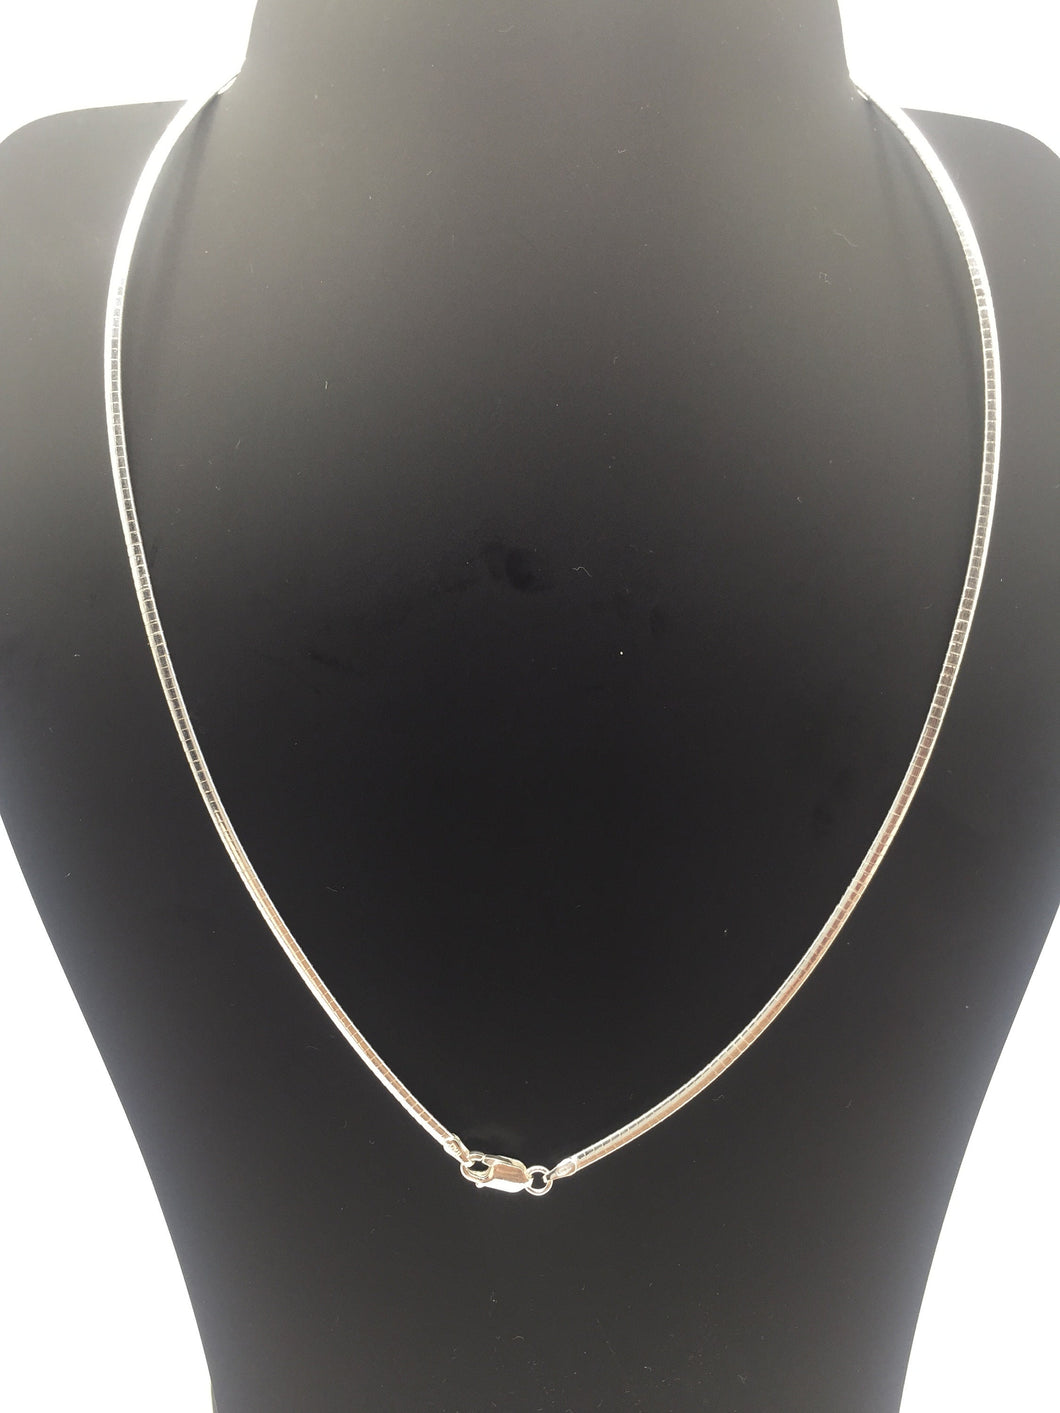 Omega chain,silver chain,sterling silver chain,925 silver chain,flat omega,flat omega chain